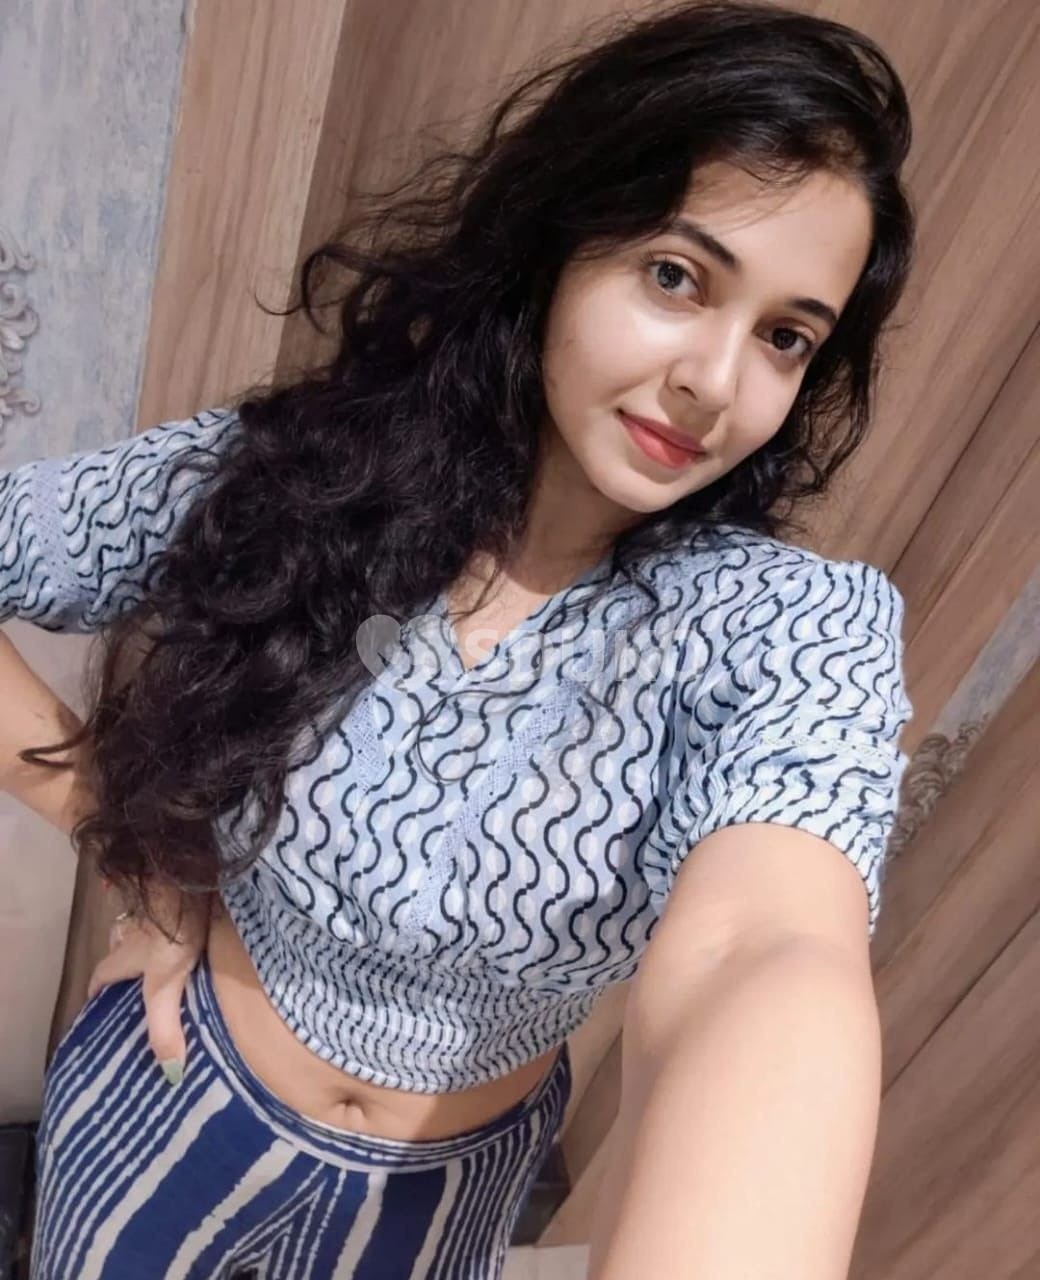 Myself Kavya VIP low price best genuine and trustable call girl service in Bathinda full safe and secure place b-sexual 